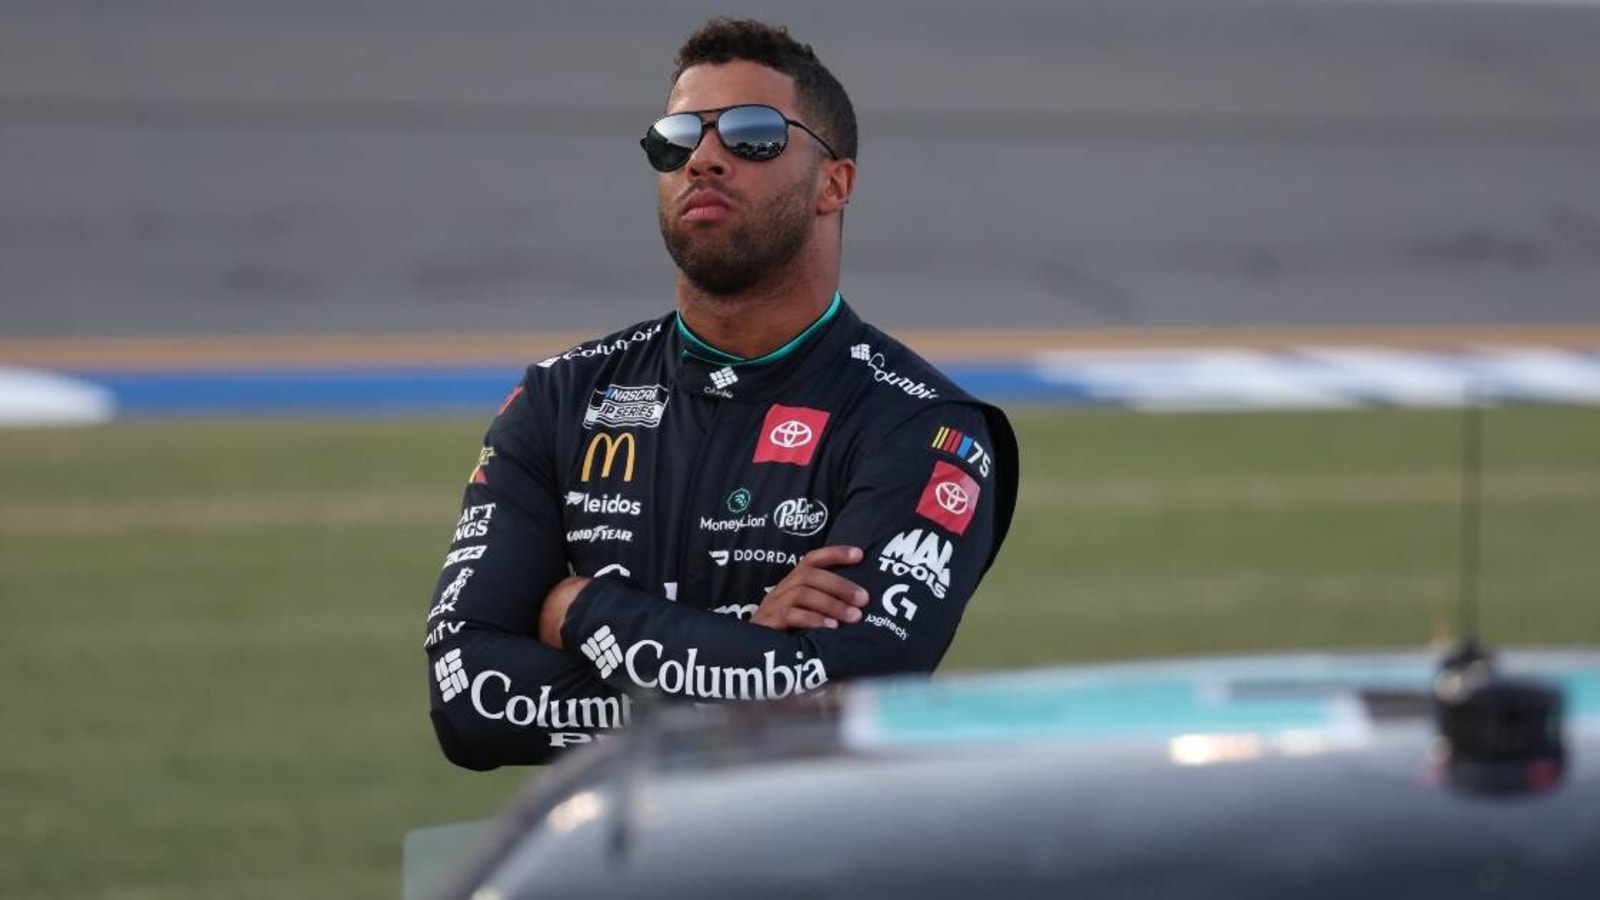 Bubba Wallace landed IMSA ride after asking Toyota for help on road courses